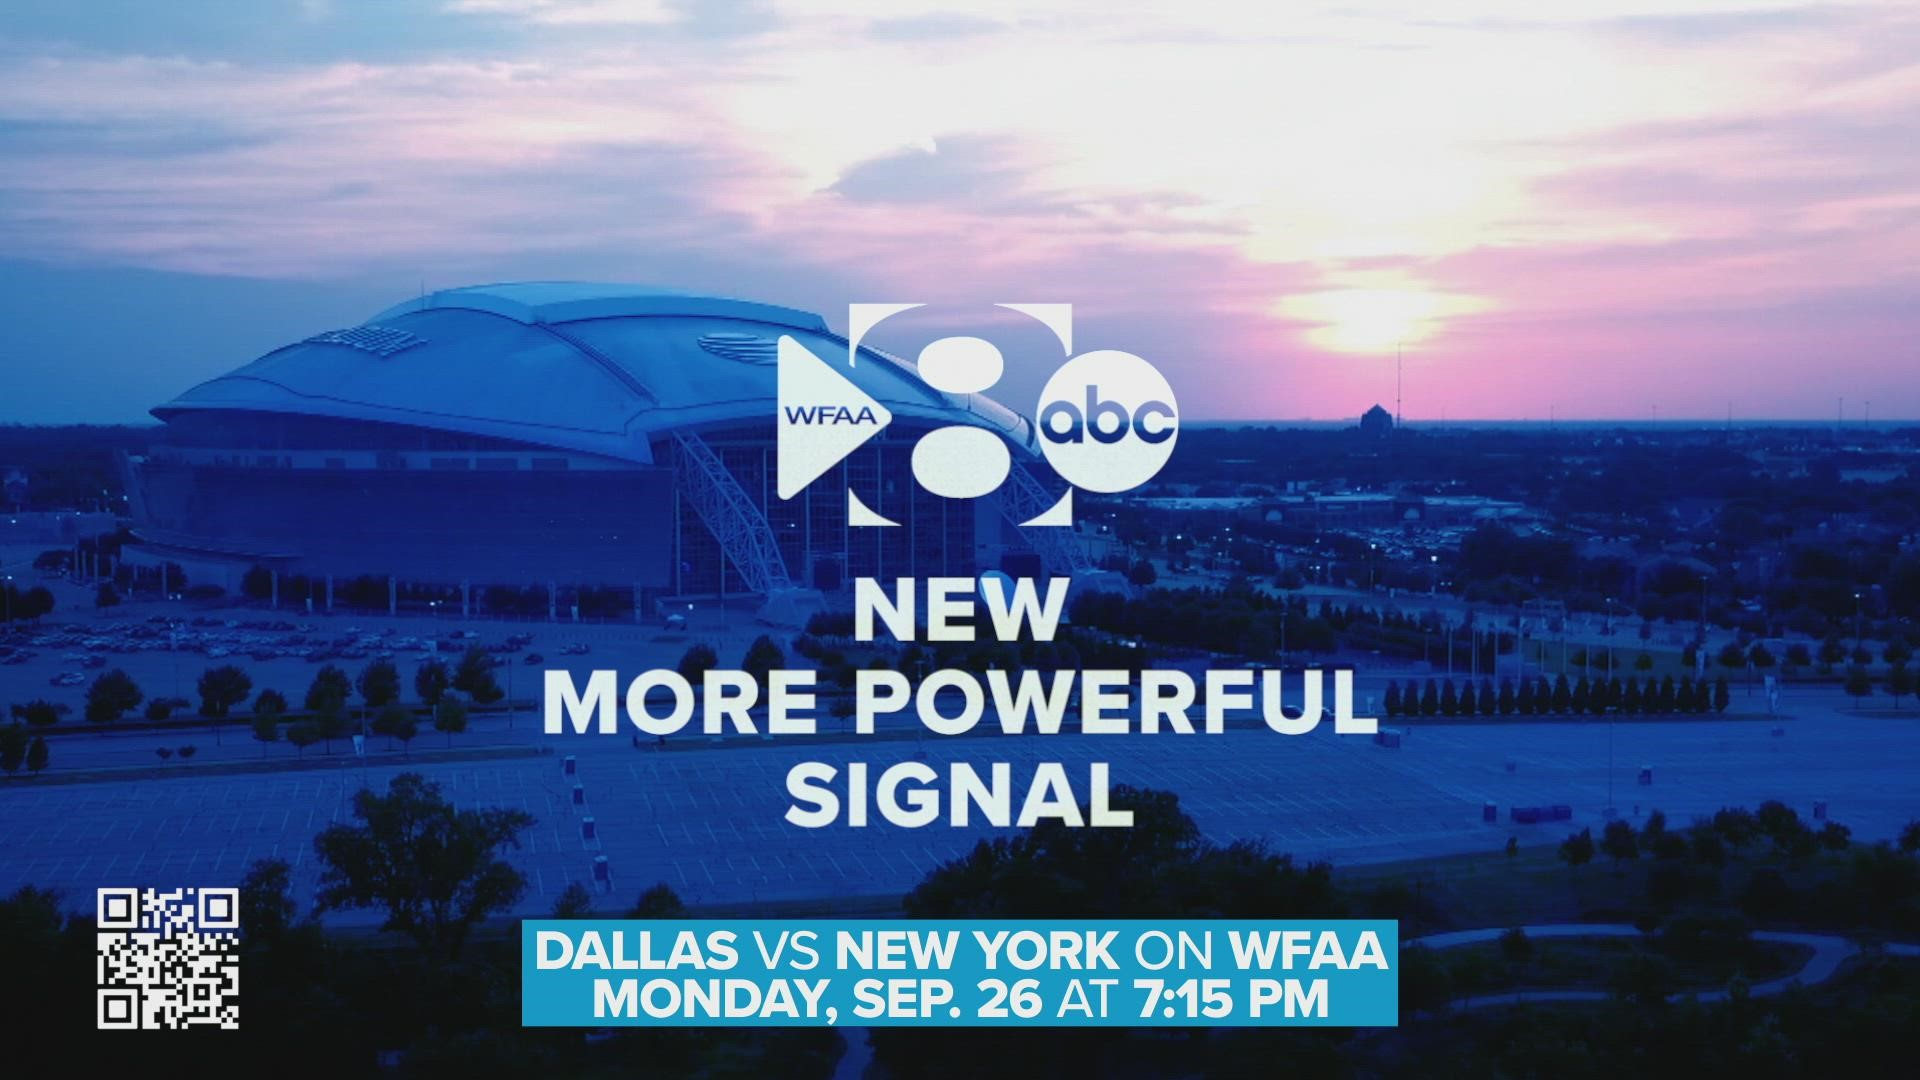 If you're using an antenna to watch the Cowboys play the Giants on WFAA this week, make sure you rescan your TV -- because WFAA now has a new, more powerful signal.